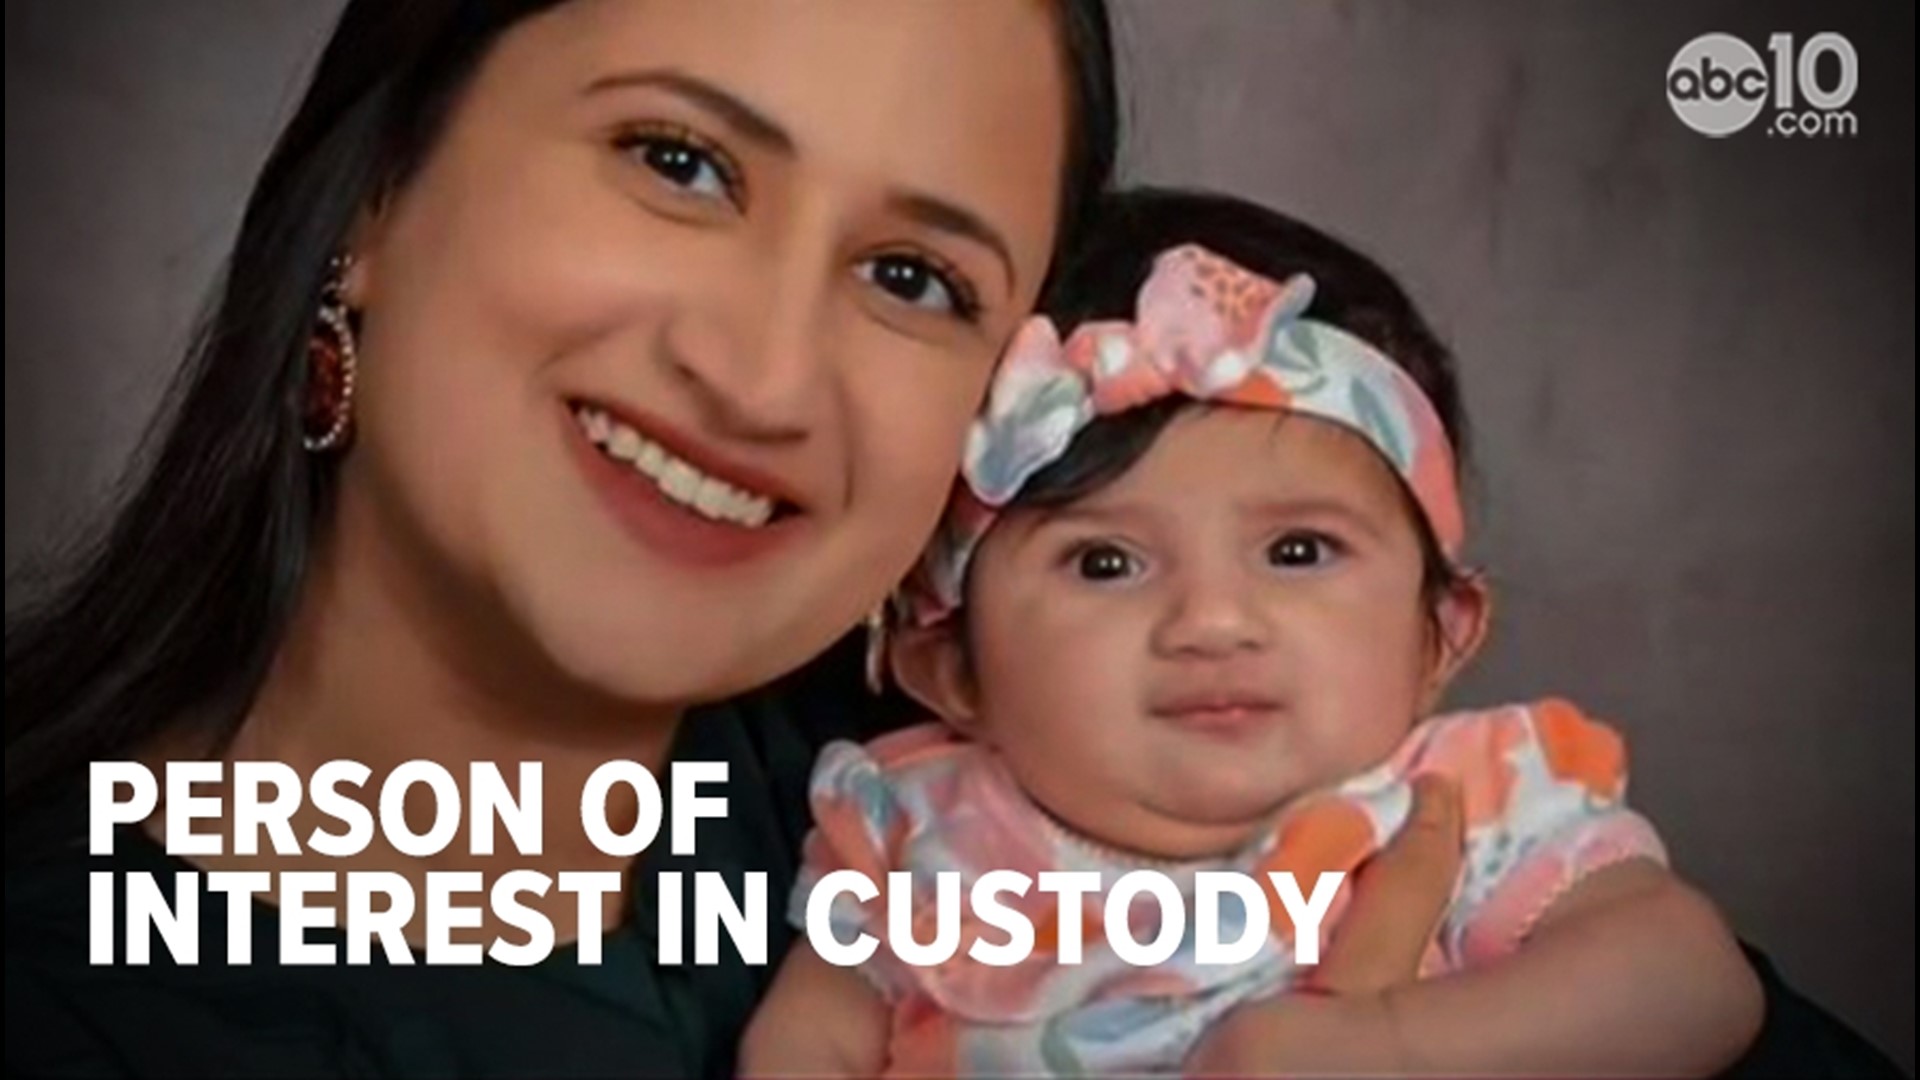 A 48-year-old person of interest in the kidnapping of a baby, mother, father and uncle in Merced is now in custody and in critical condition.